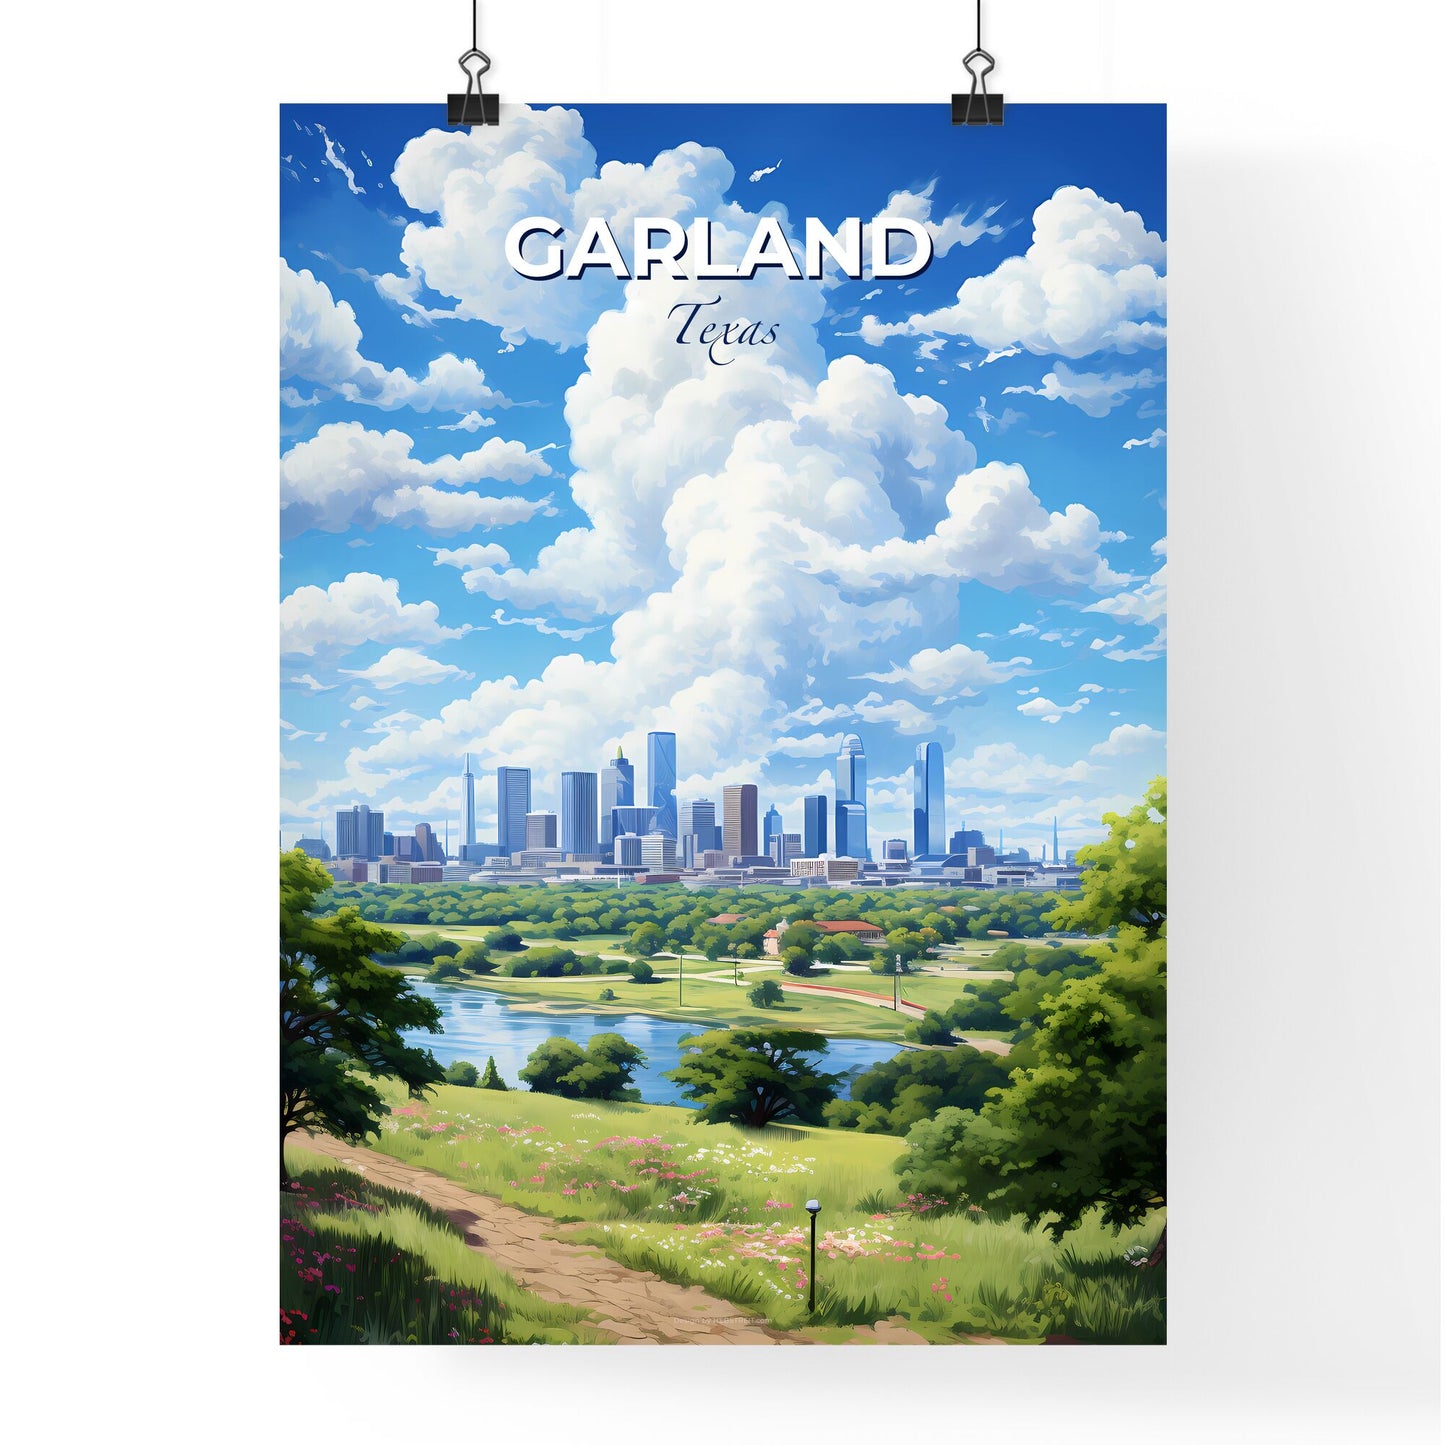 Garland Texas Skyline - A Landscape Of A City With A River And Trees - Customizable Travel Gift Default Title